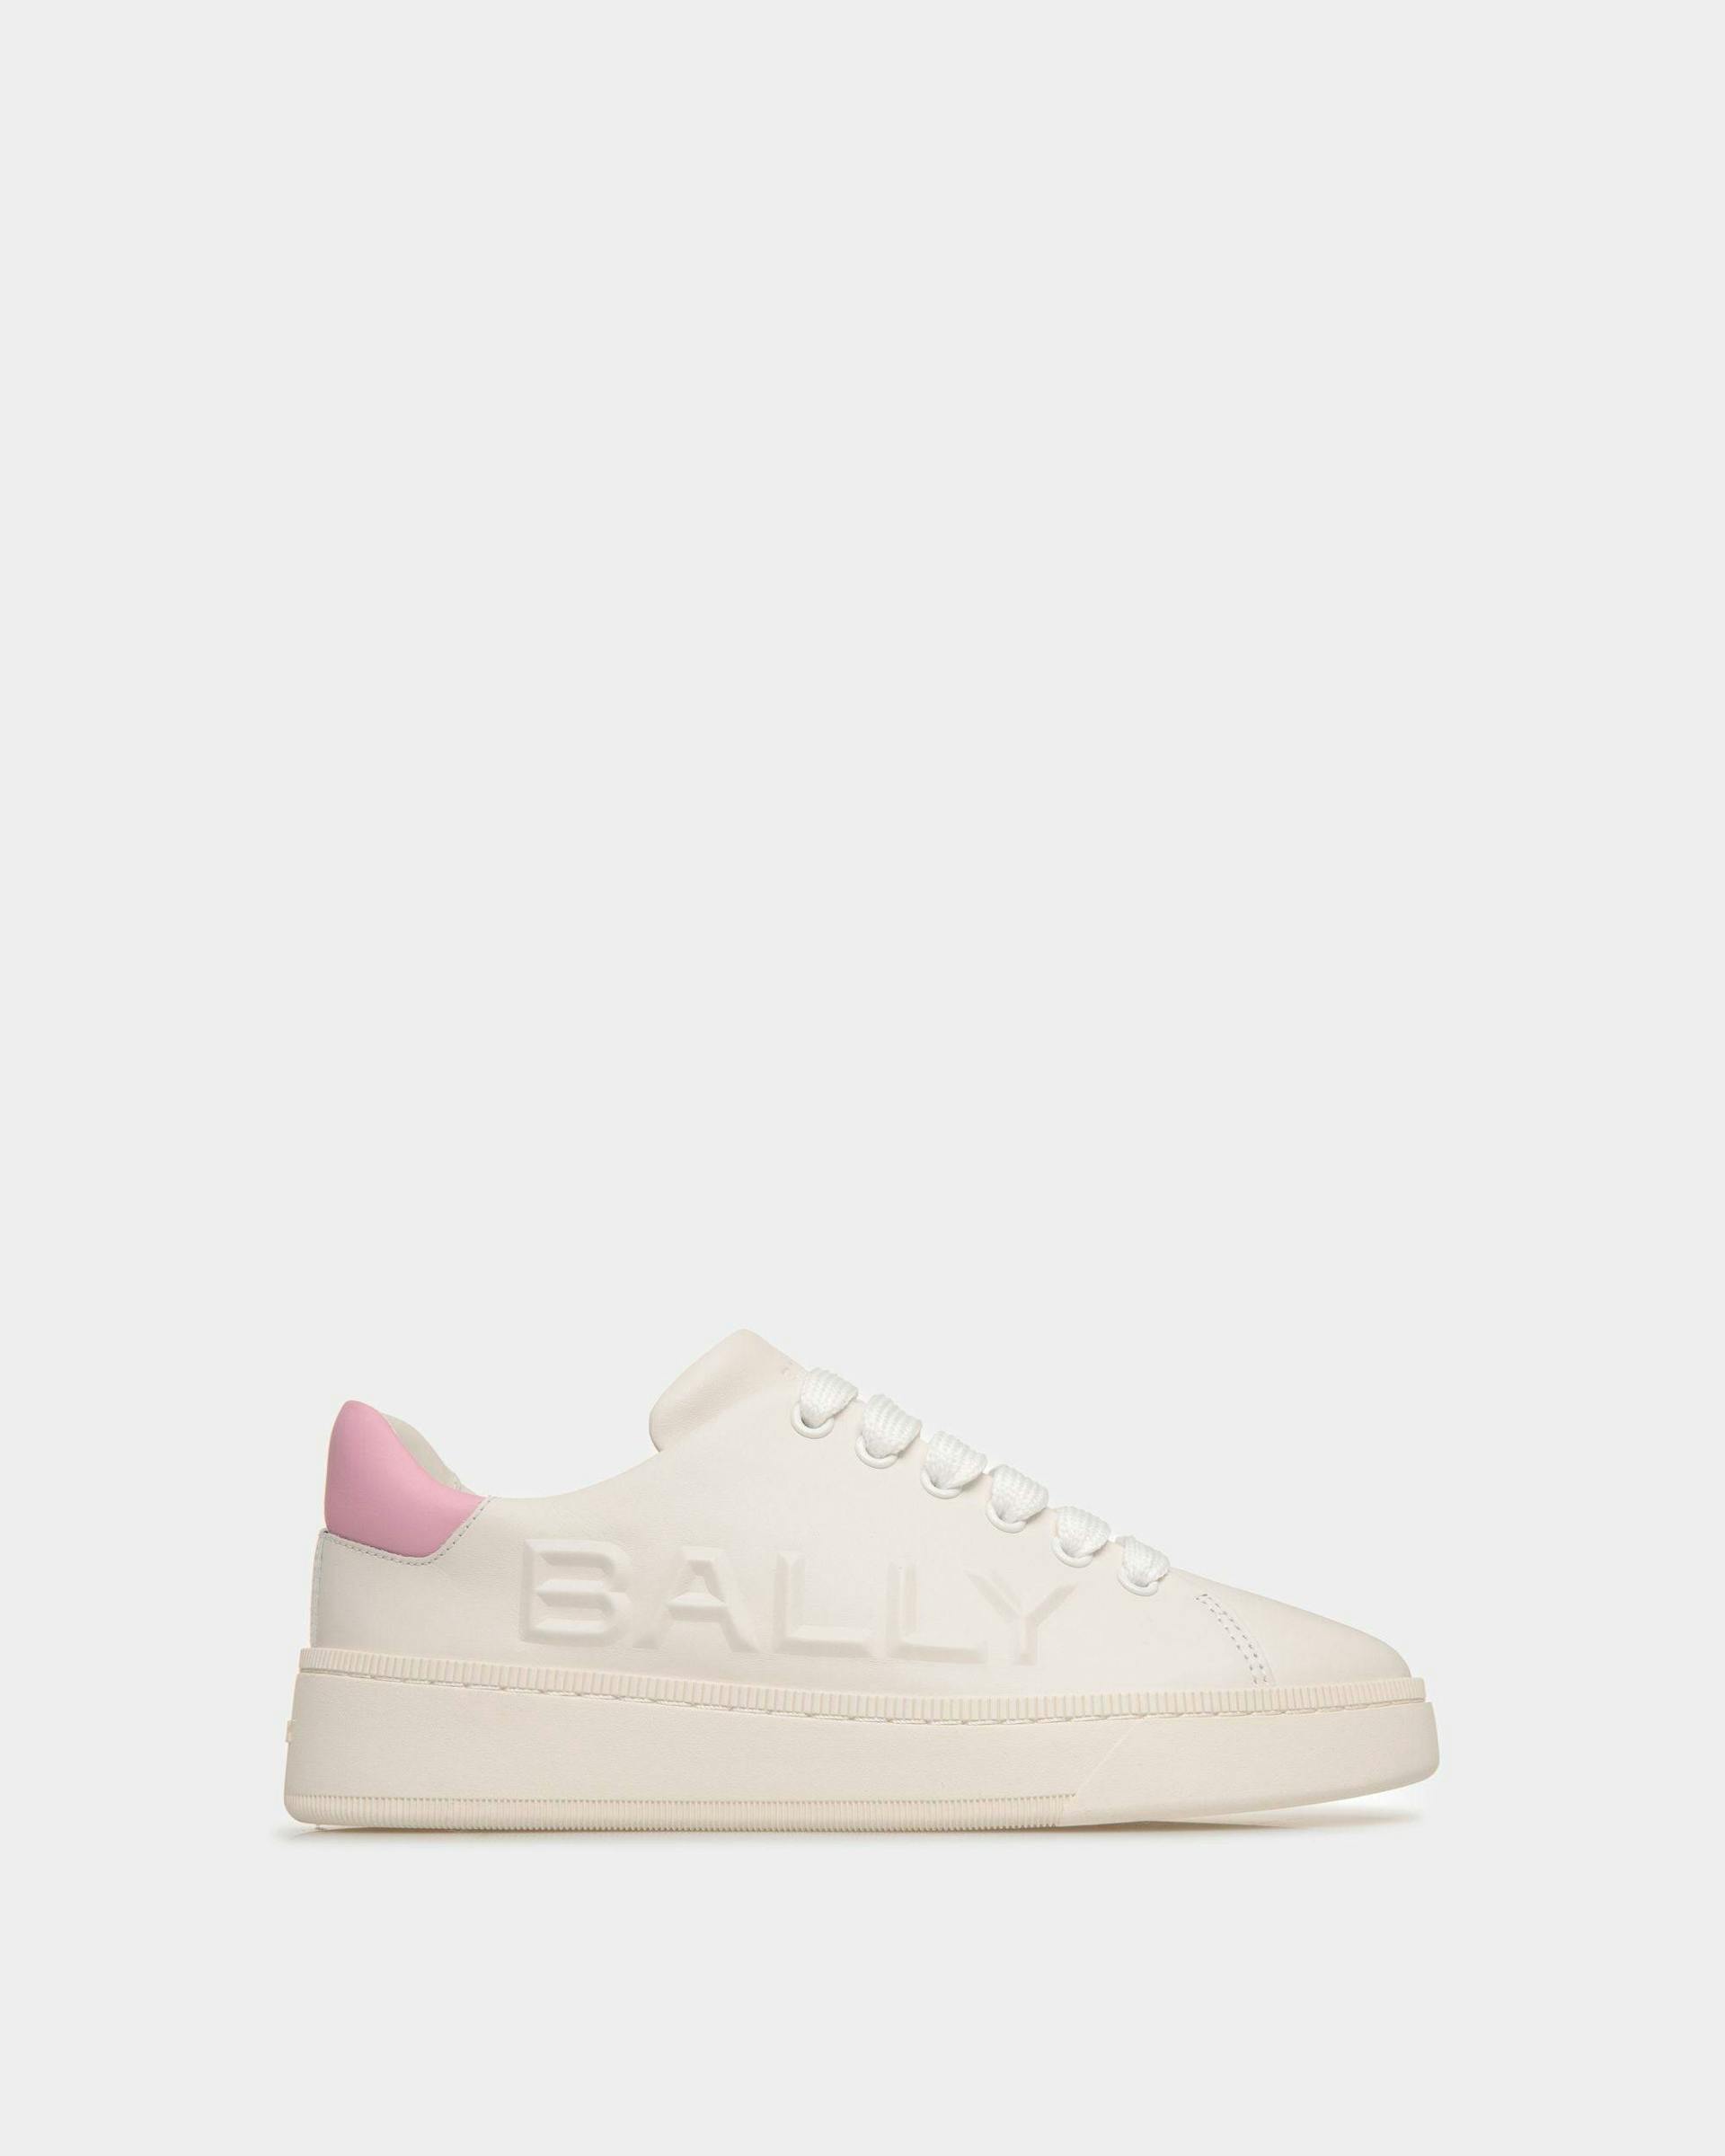 Women's Raise Sneaker In White And Pink Leather | Bally | Still Life Side